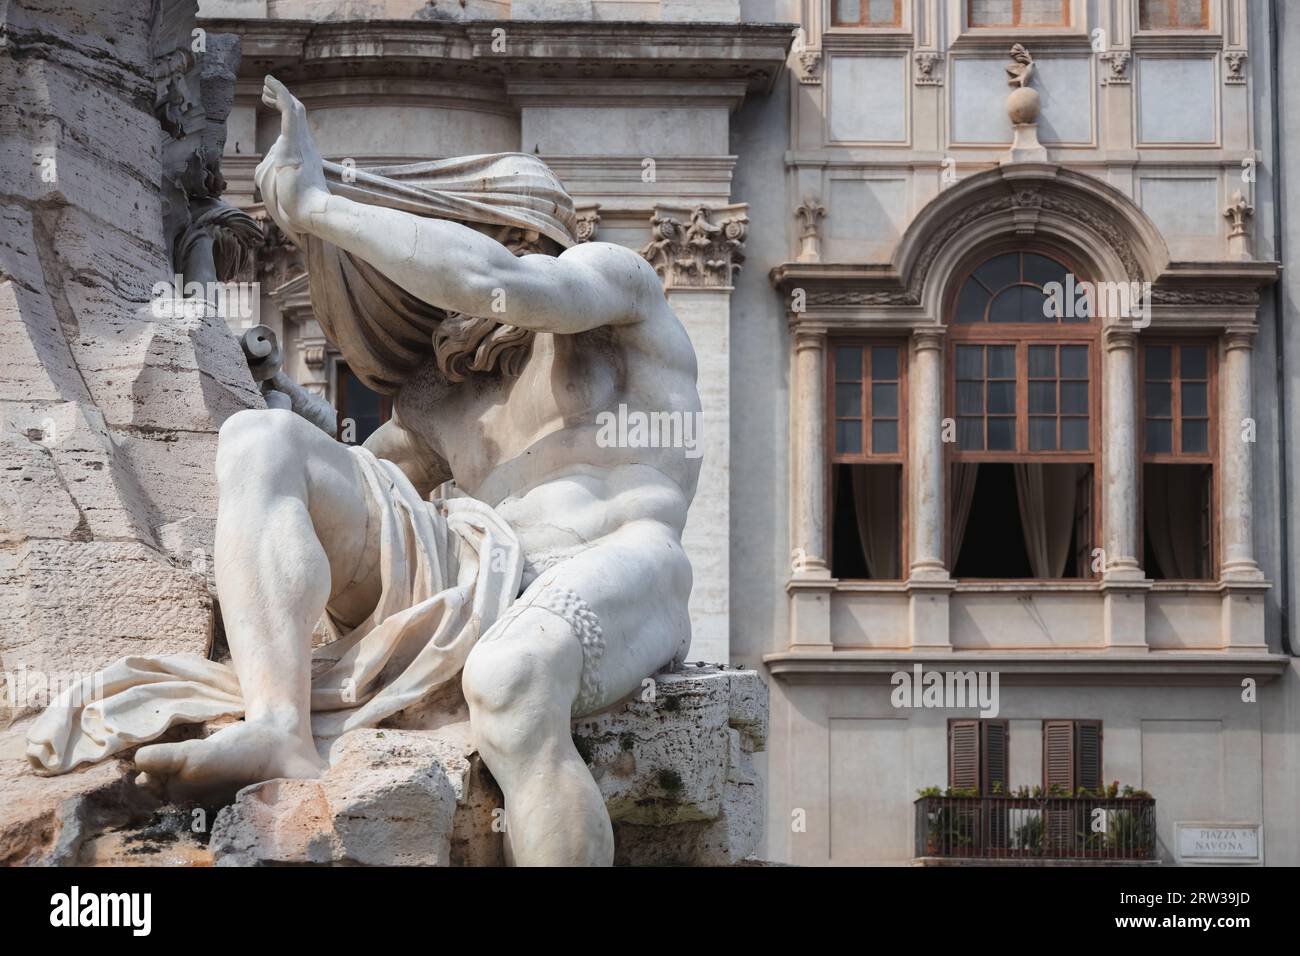 Close-up detail of biblical figure in Bernini's sculpted Baroque Fountain of the Four Rivers in Piazza Navona, a popular tourist landmark in the histo Stock Photo